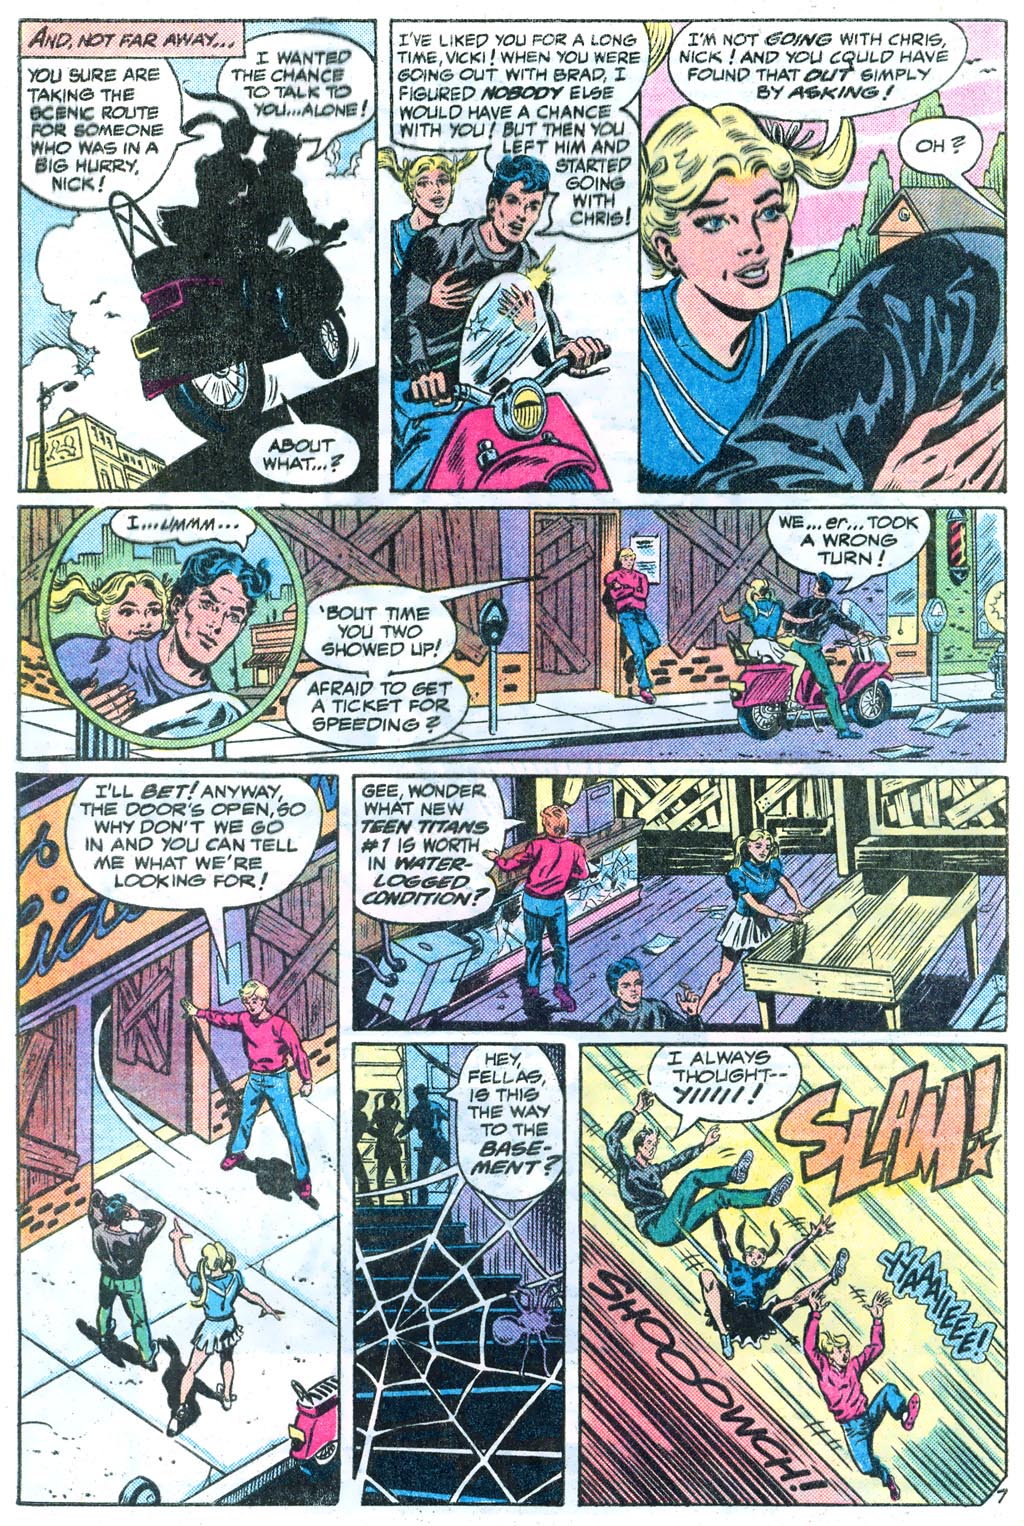 The New Adventures of Superboy 48 Page 30